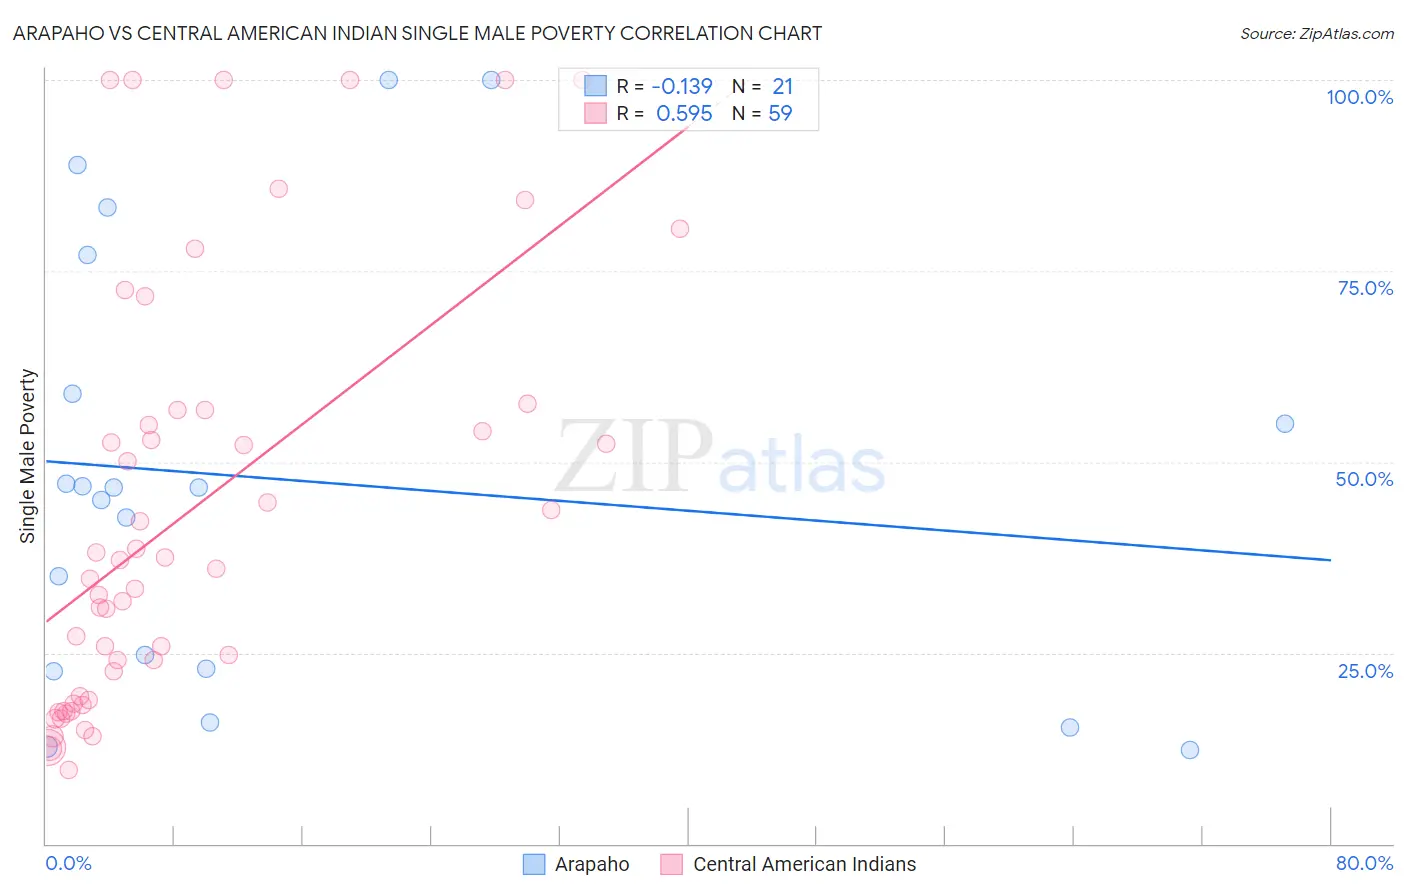 Arapaho vs Central American Indian Single Male Poverty